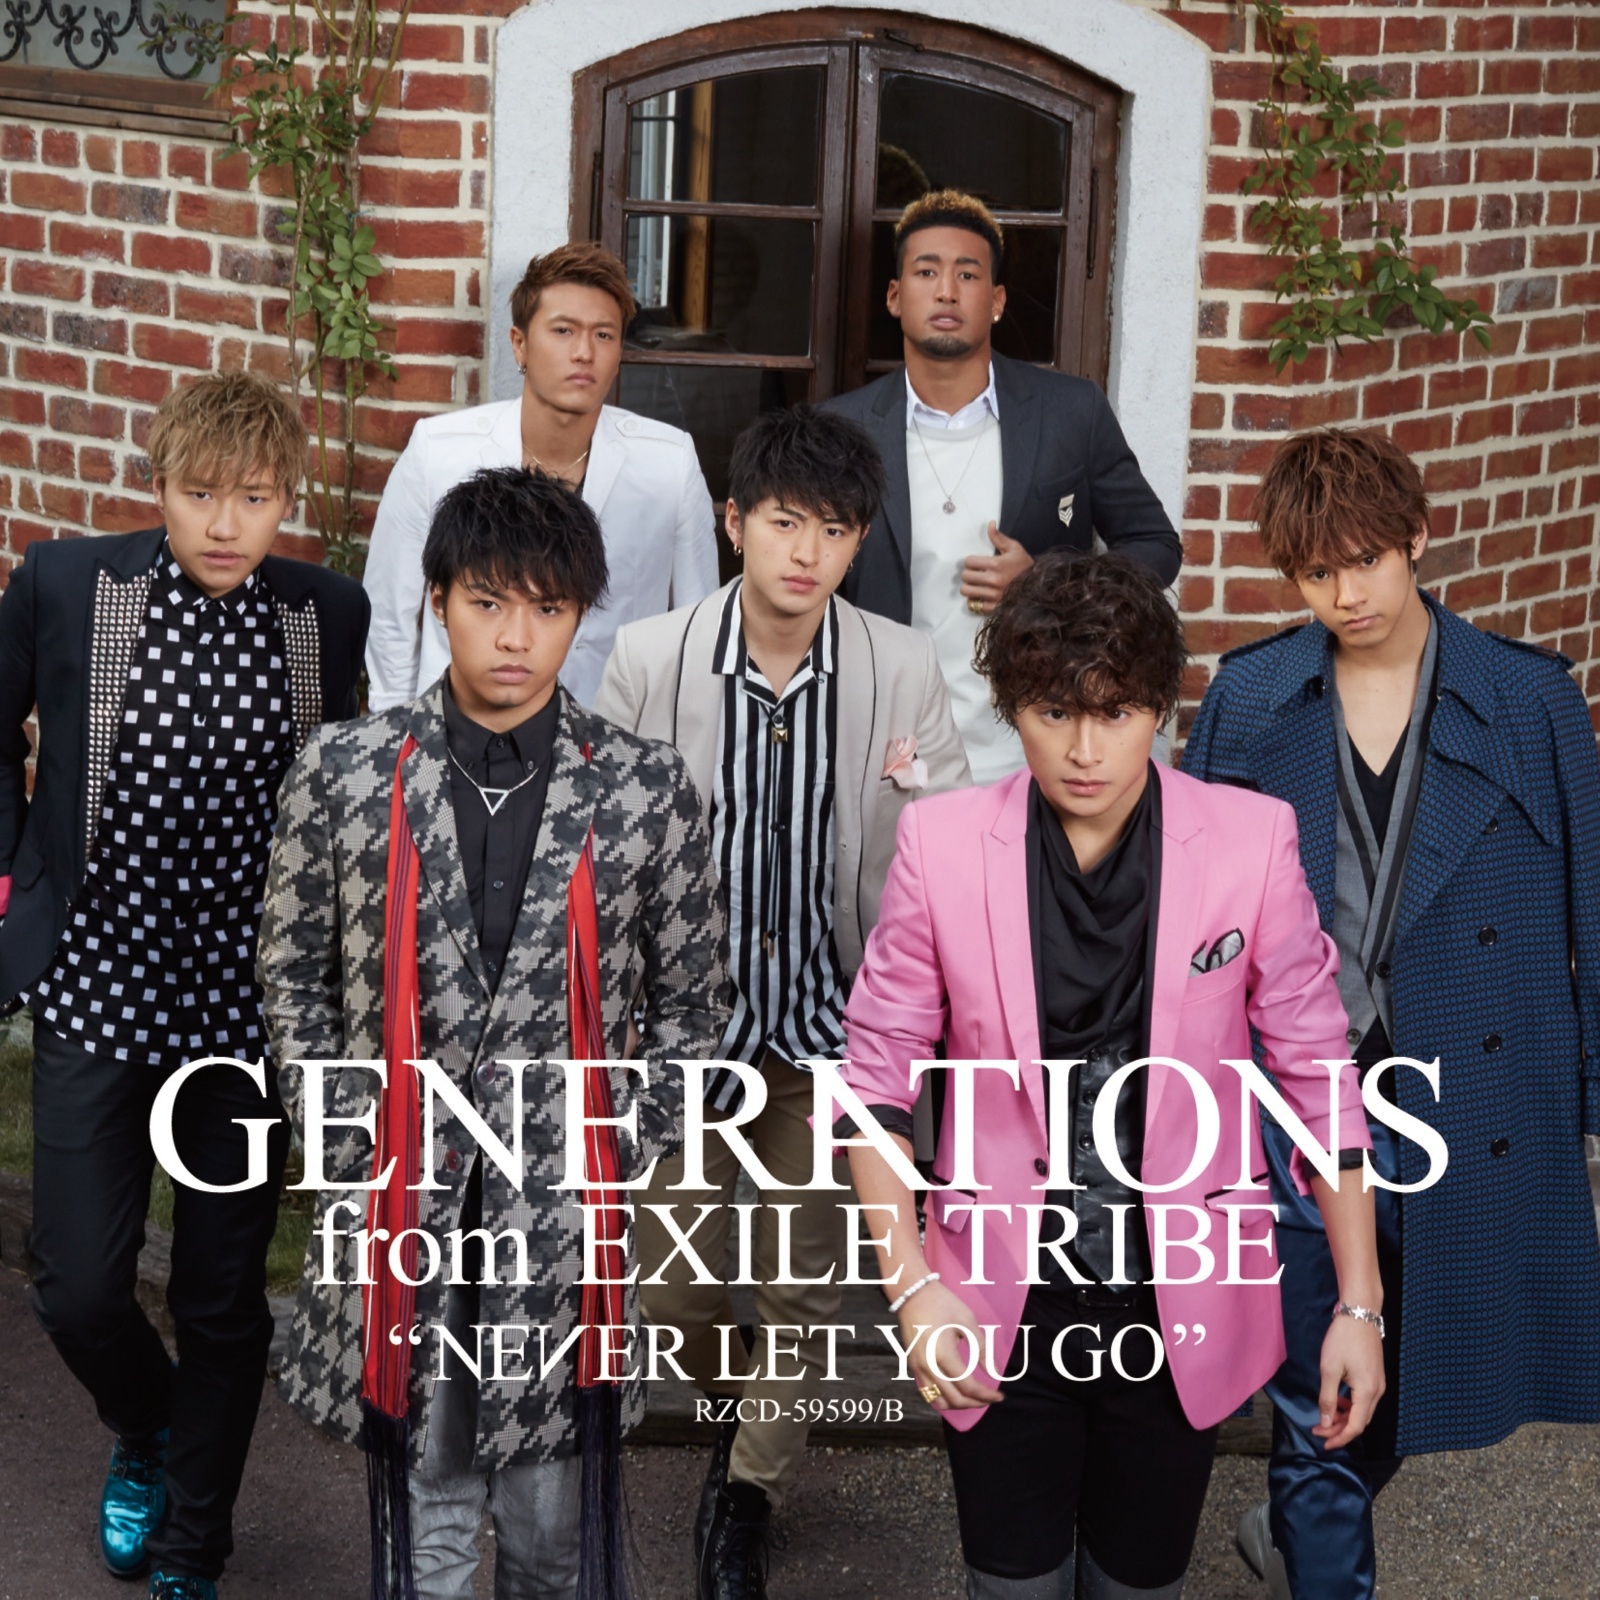 never let you go(GENERATIONS from EXILE TRIBE演唱歌曲)